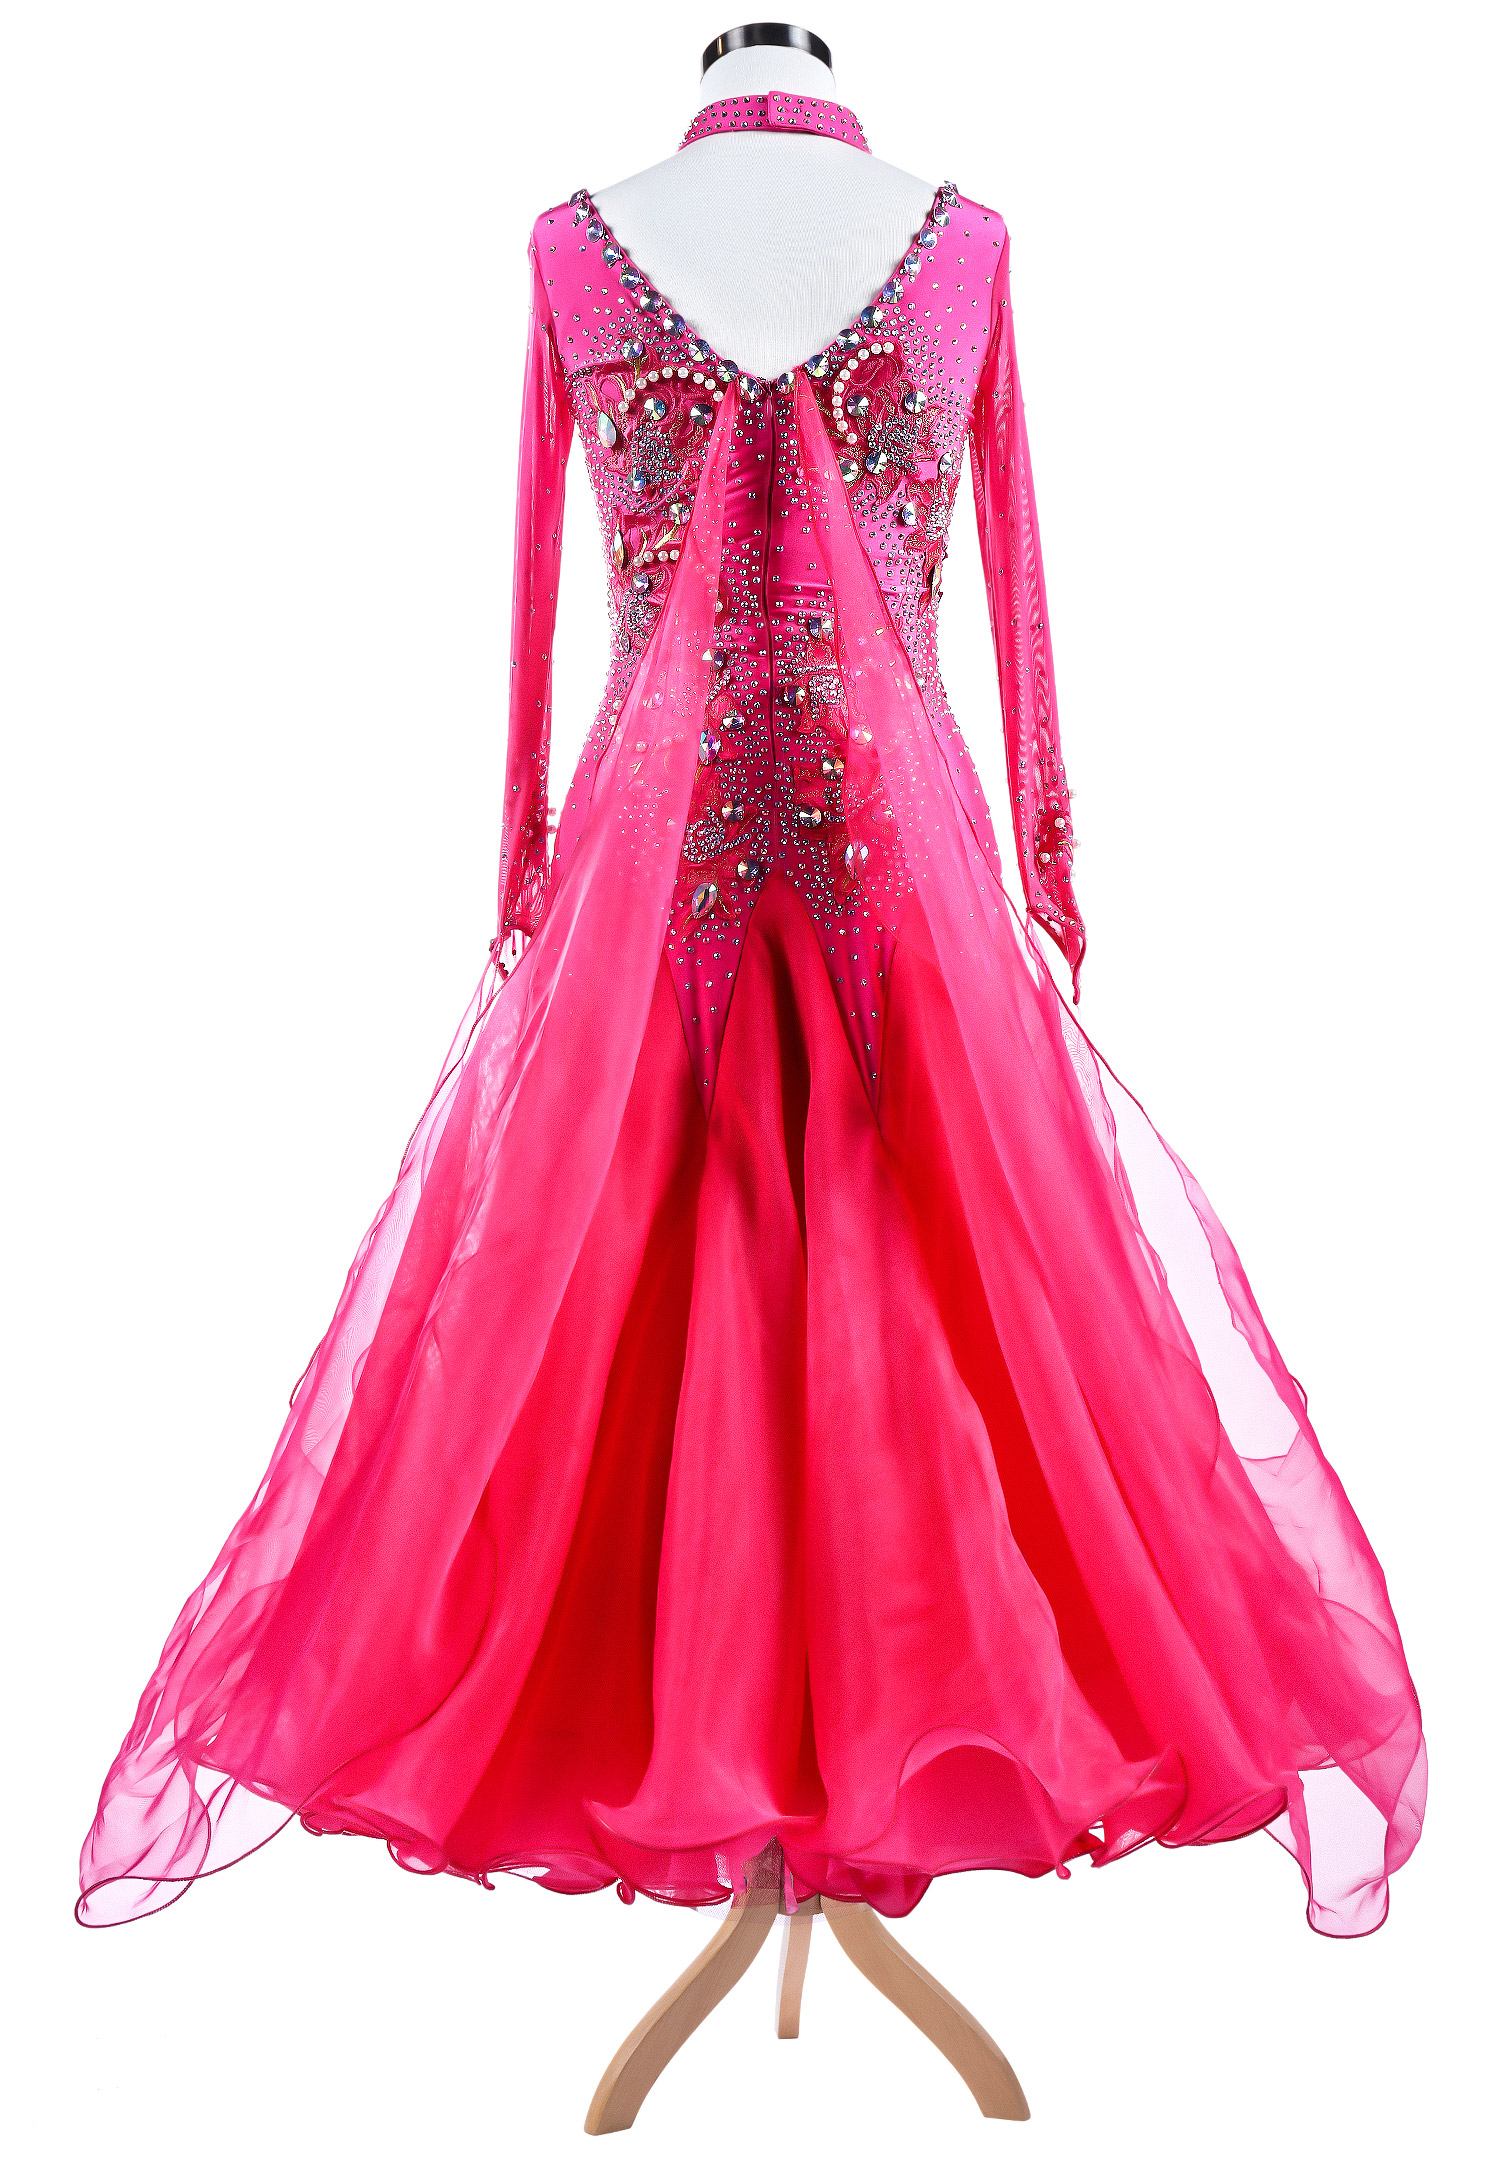 Pearl Rose Embroidered Ballroom Competition Dress A5290 | Ballroom Smooth